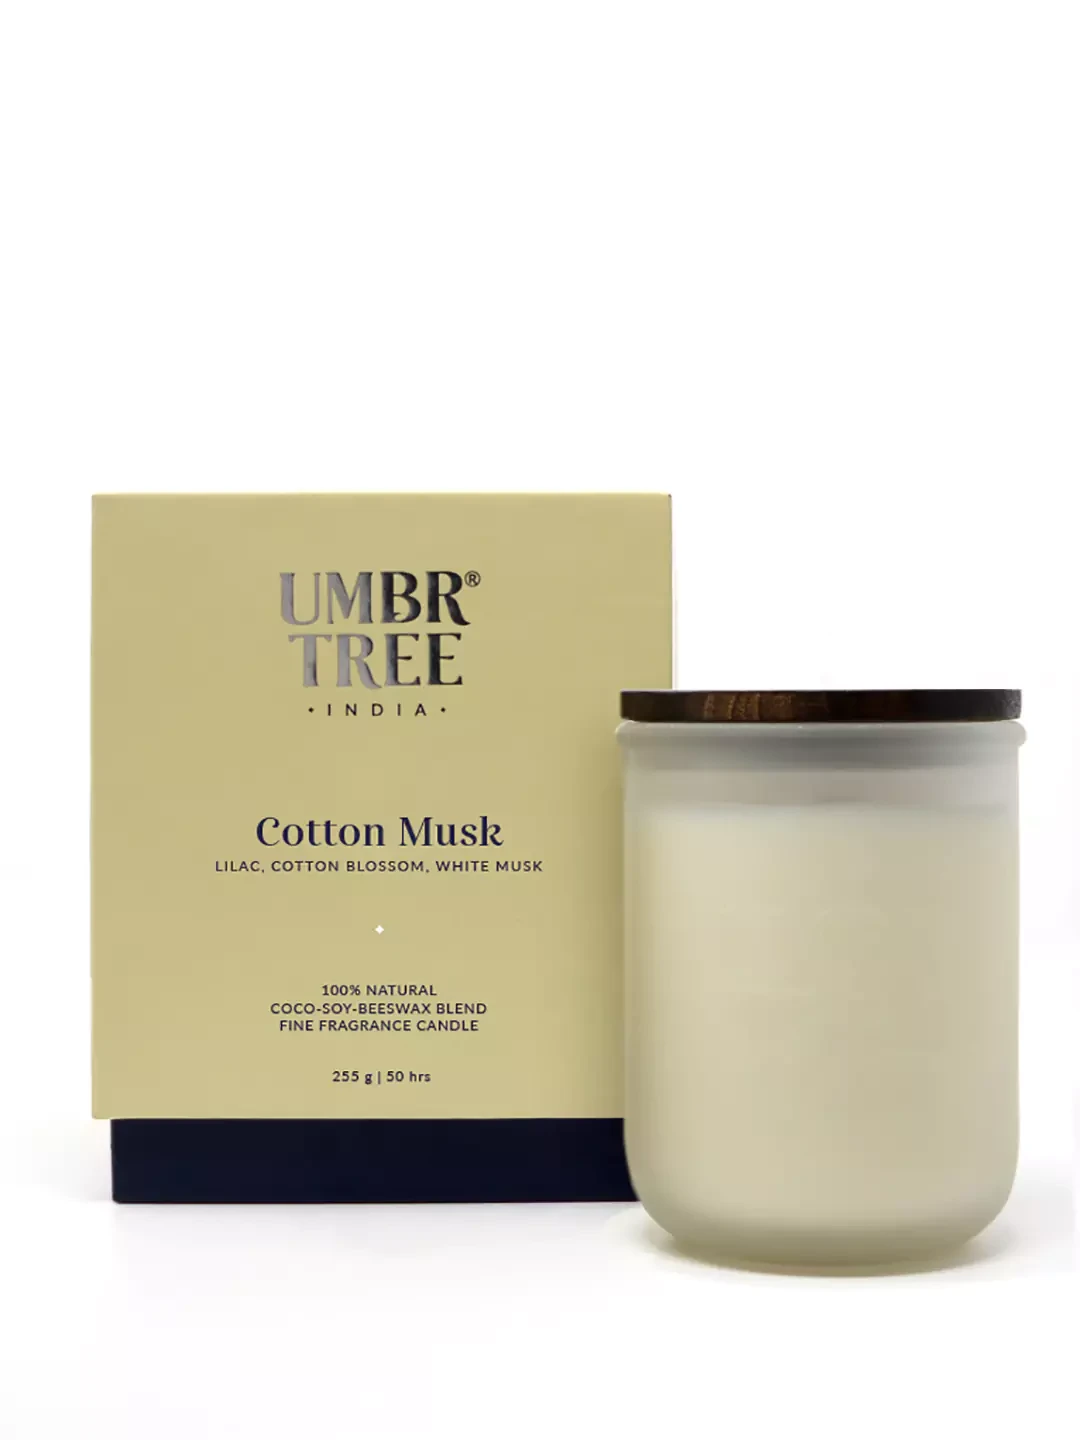 Cotton Musk Organic Fine Fragrance Candle 255 gm